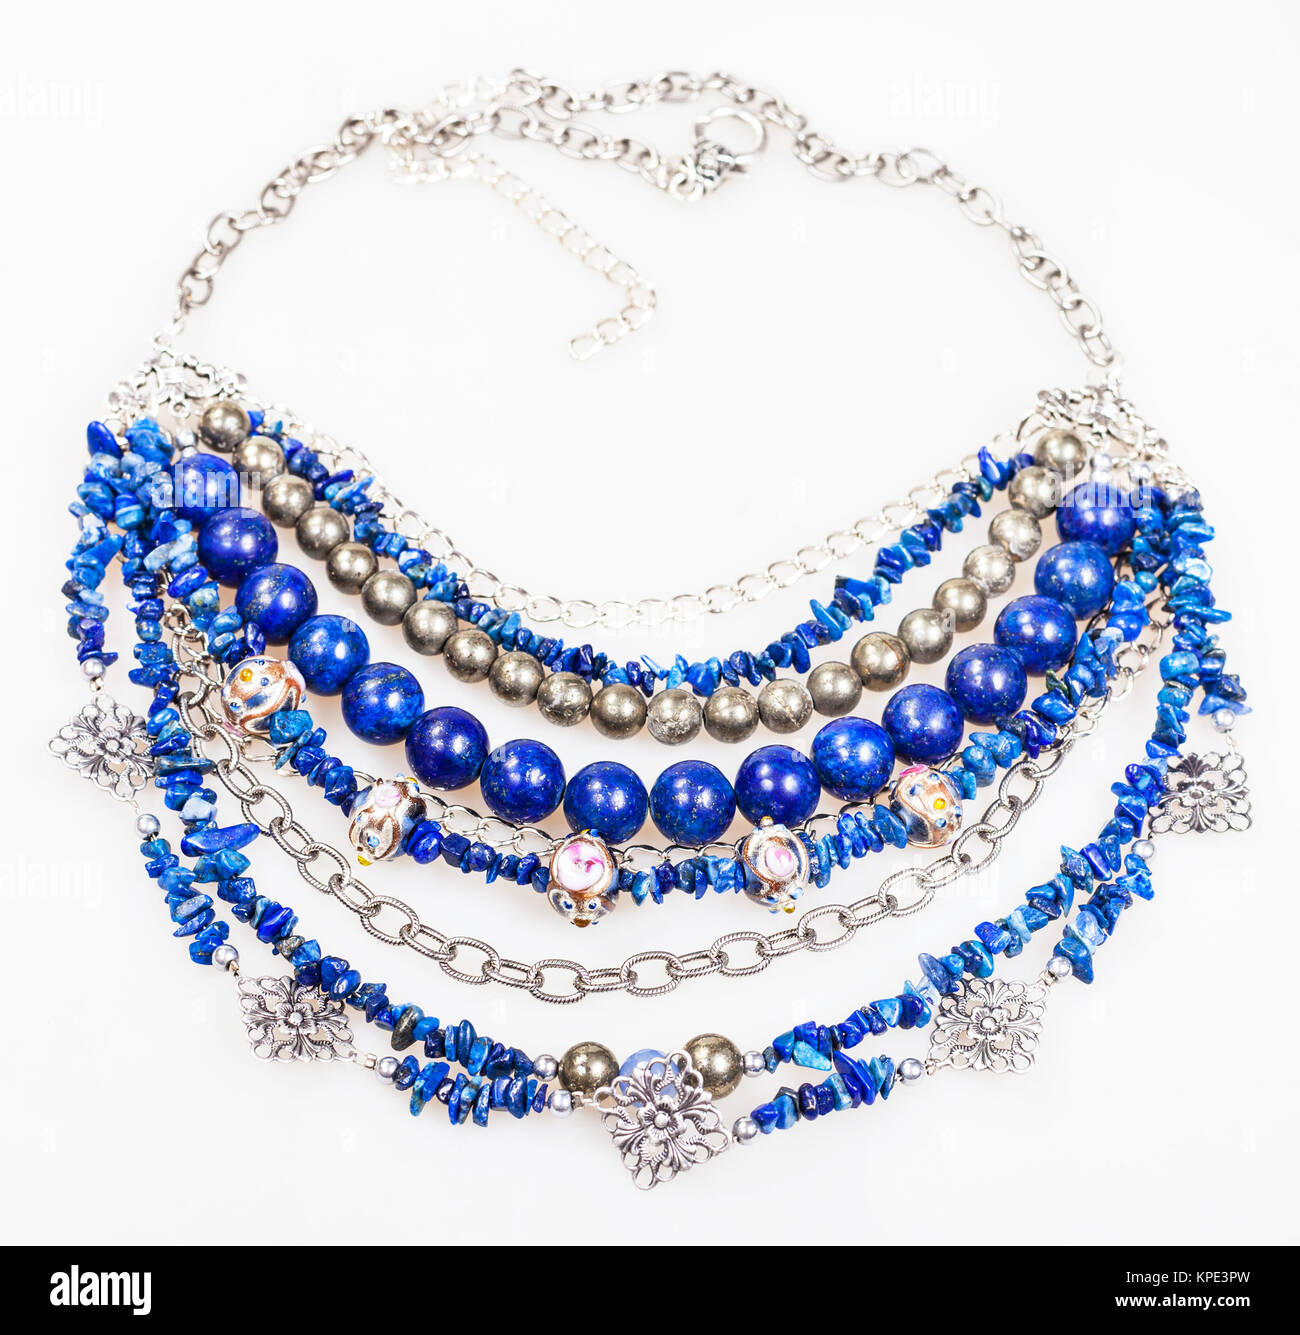 blue necklace from natural gemstones on white Stock Photo